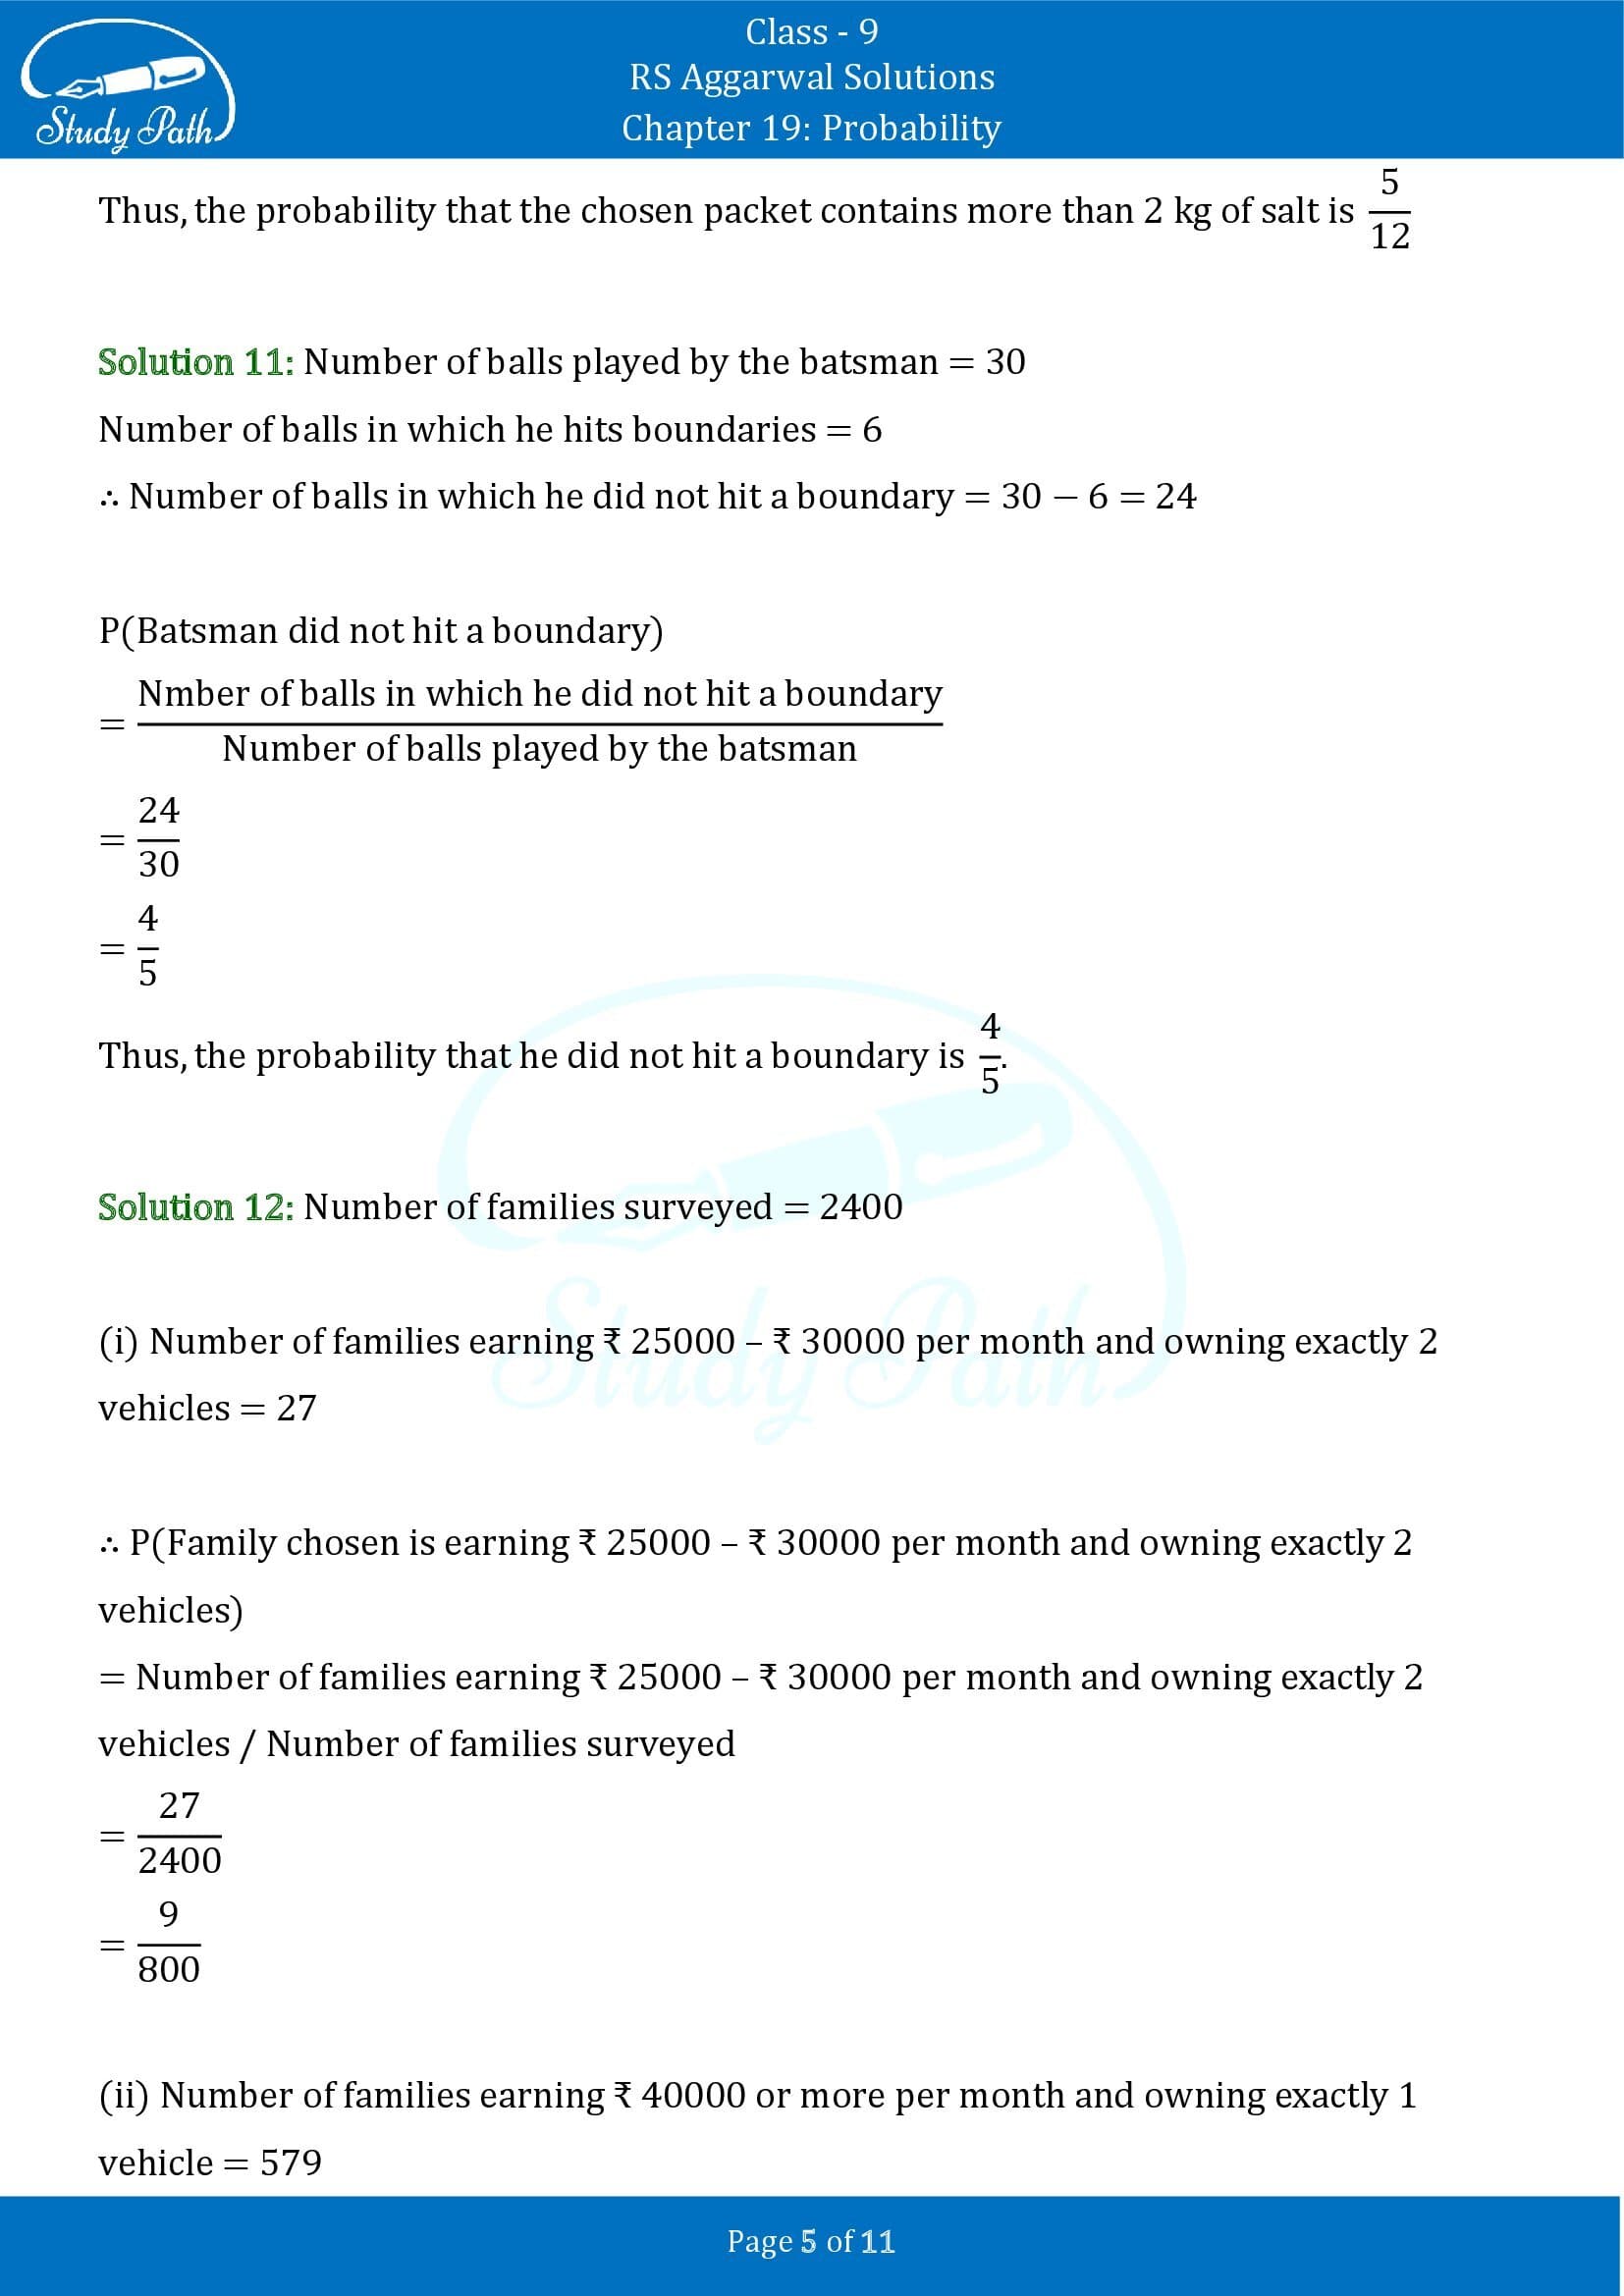 RS Aggarwal Solutions Class 9 Chapter 19 Probability Exercise 19 00005